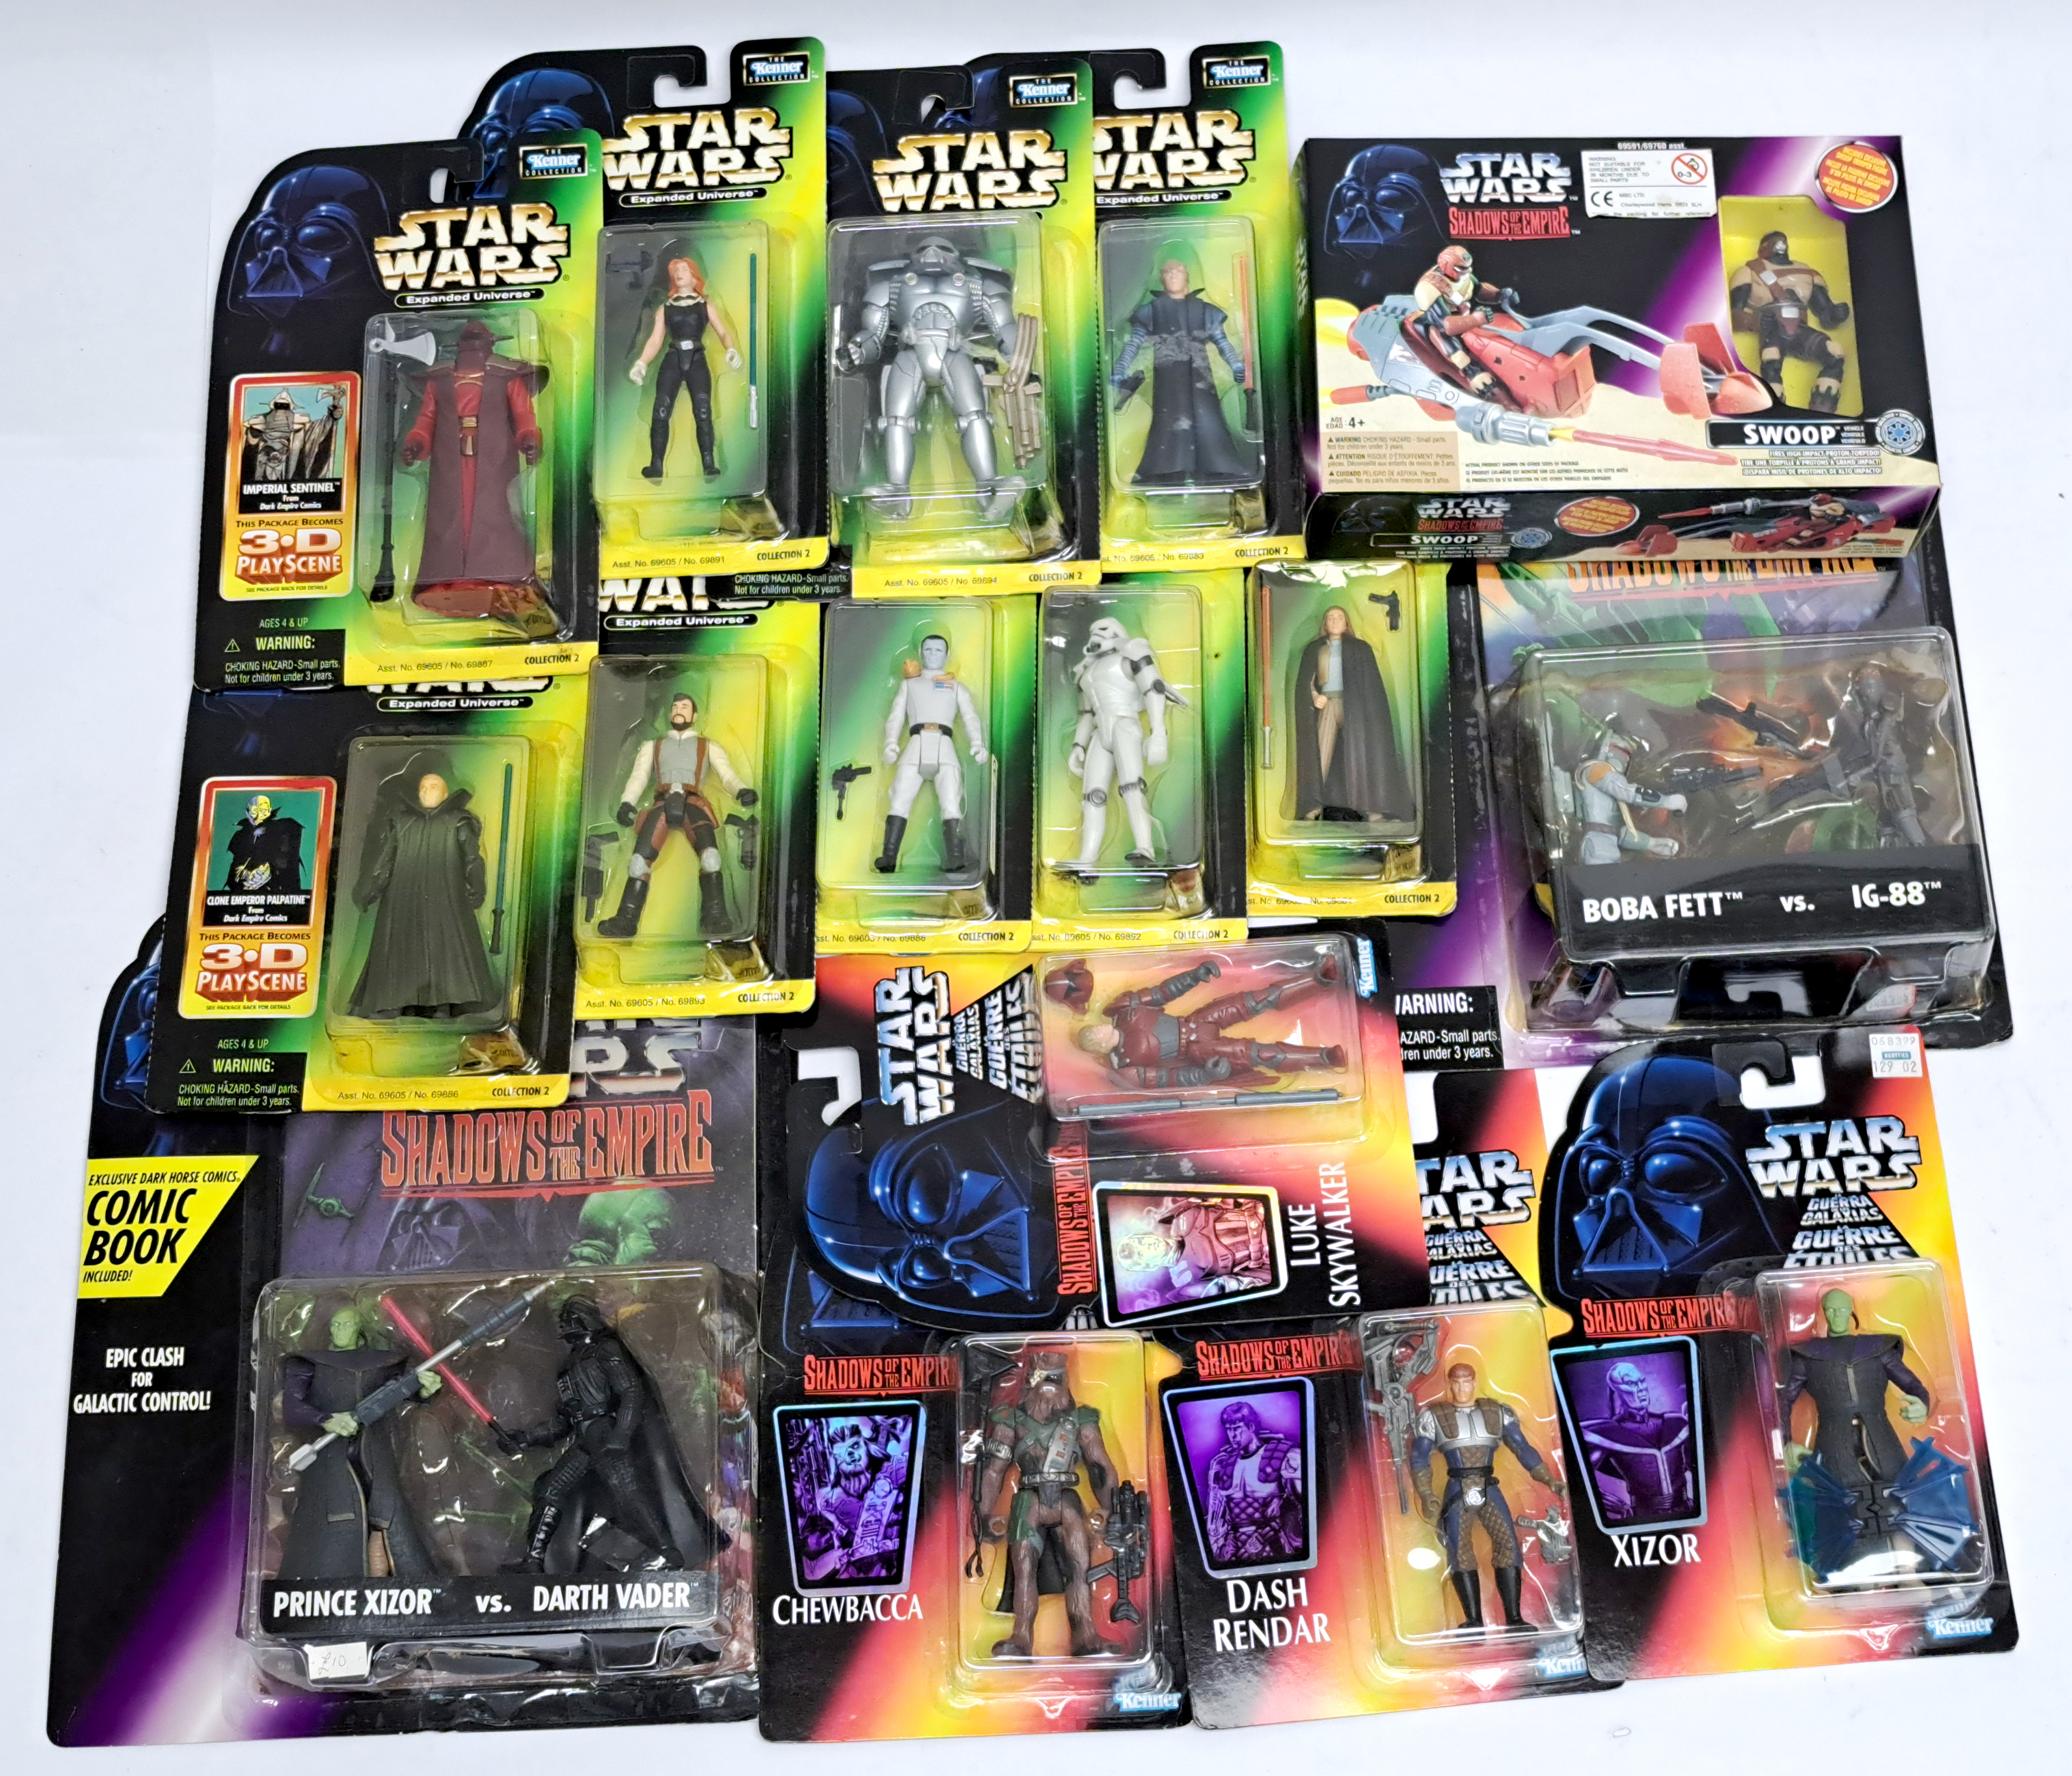 Star Wars Kenner Expanded universe and Shadows of the Empire assortment